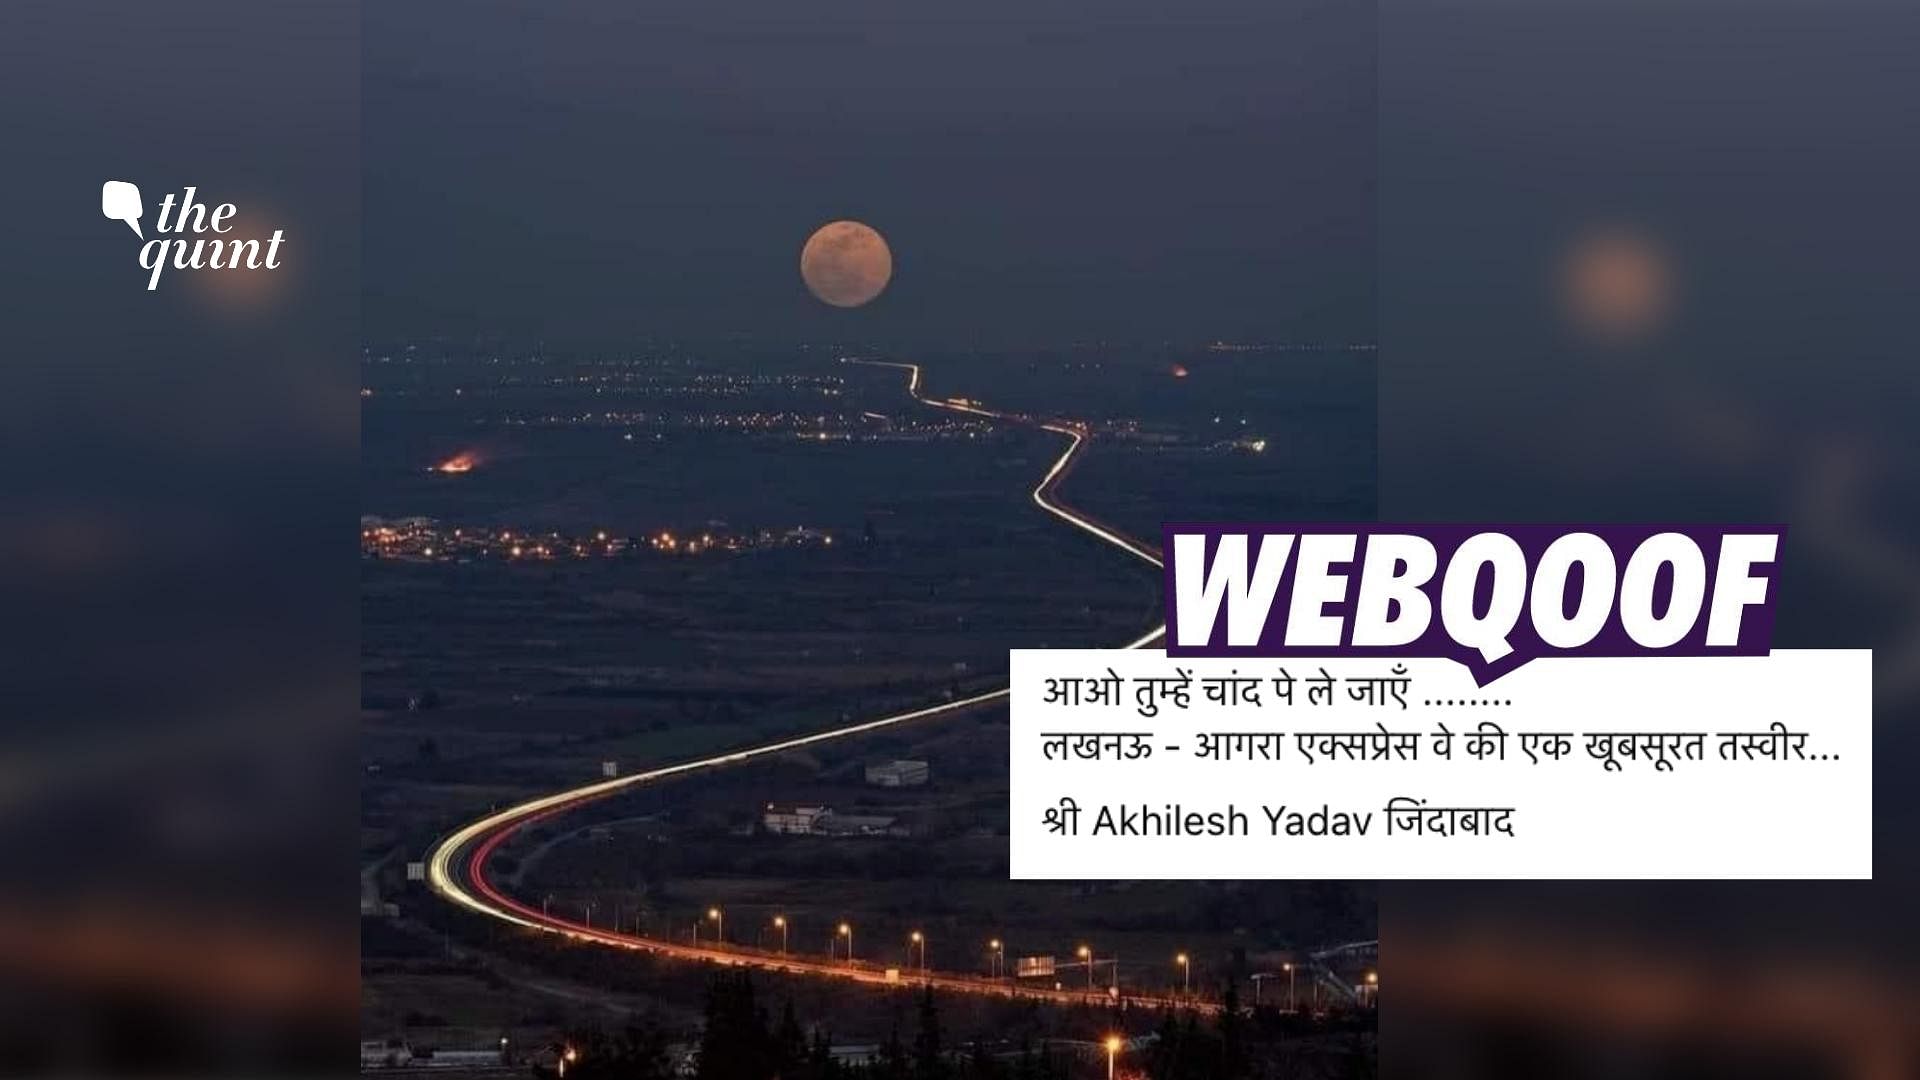 <div class="paragraphs"><p>The claim states that the photo is from the Lucknow-Agra Expressway in Uttar Pradesh.&nbsp;</p></div>